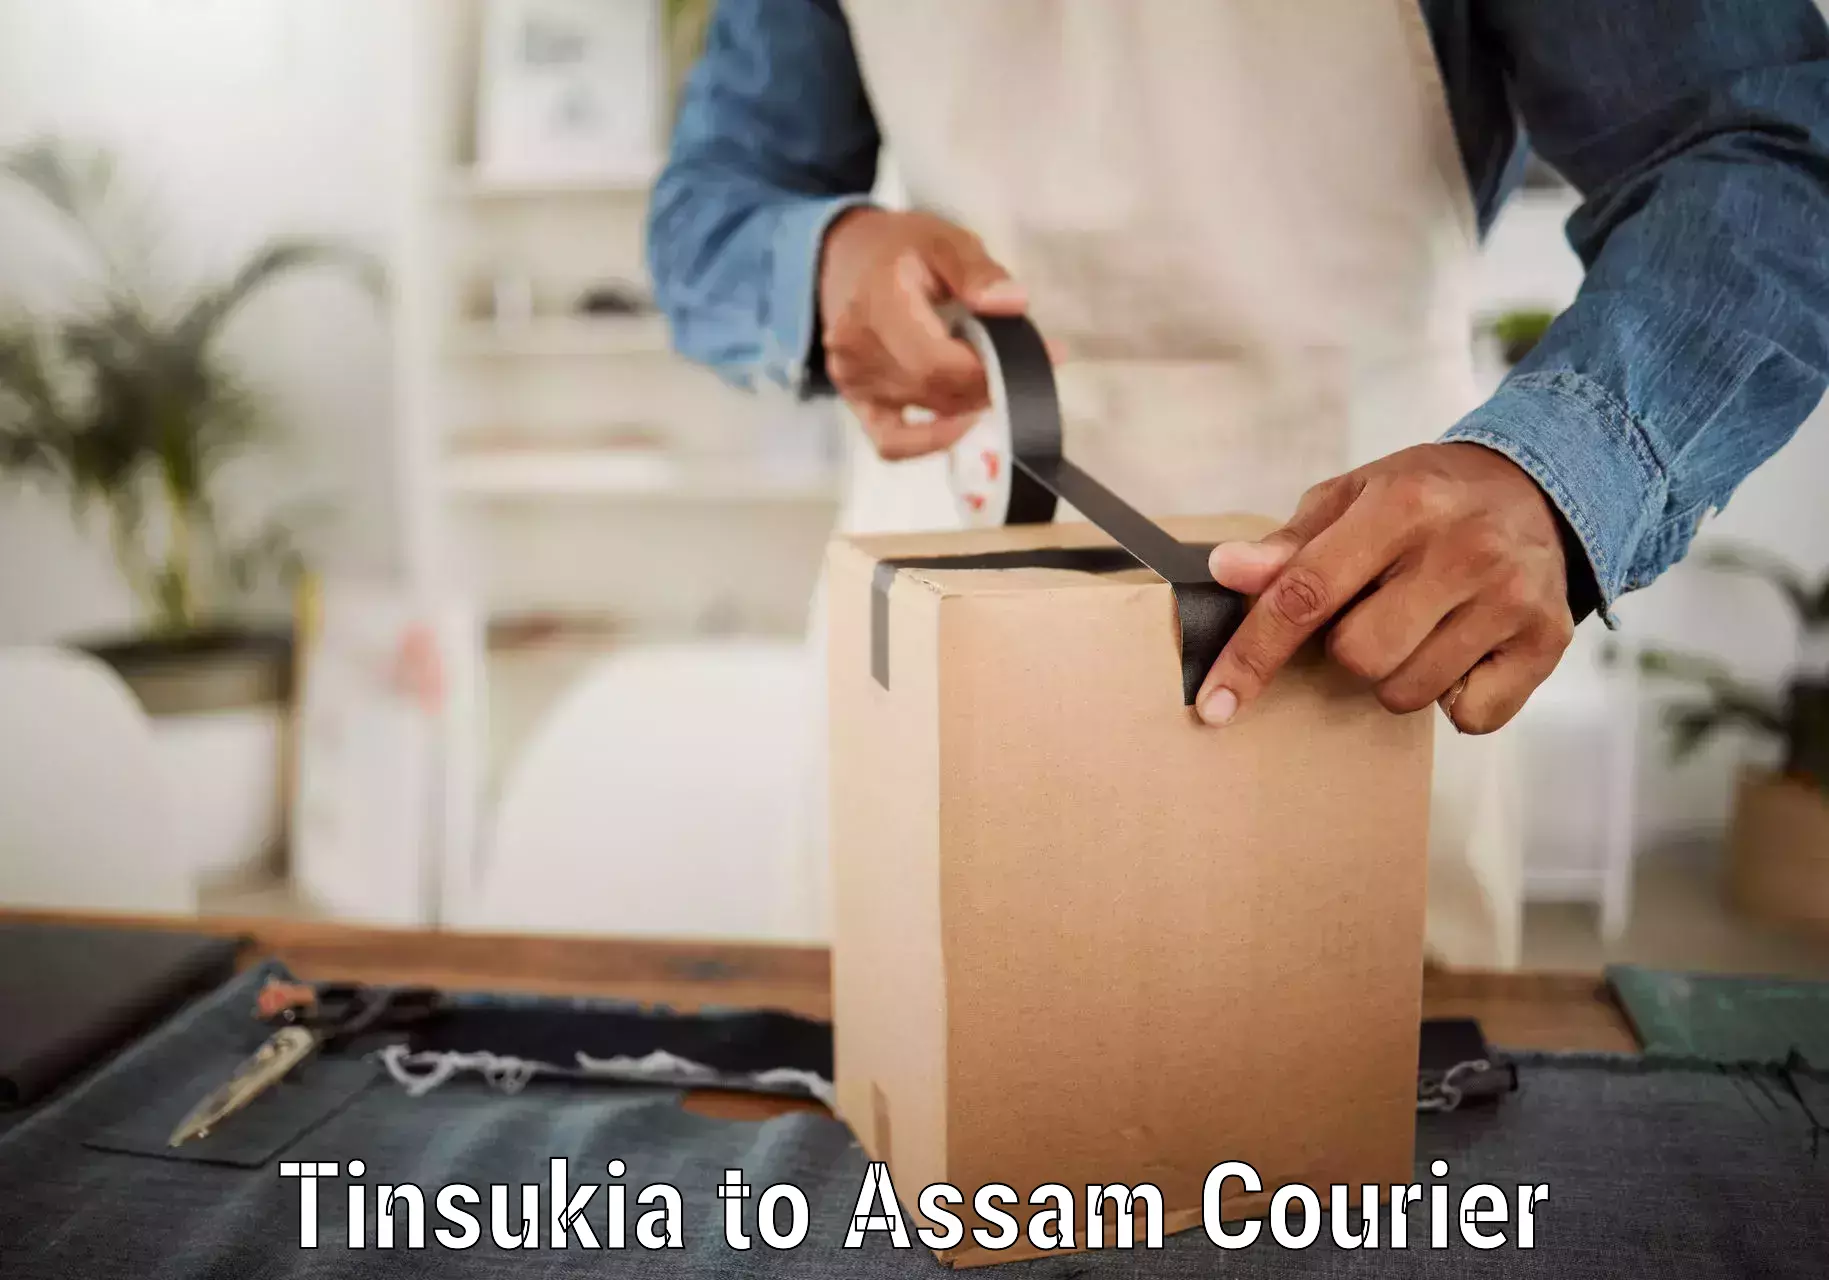 Parcel delivery automation Tinsukia to Guwahati